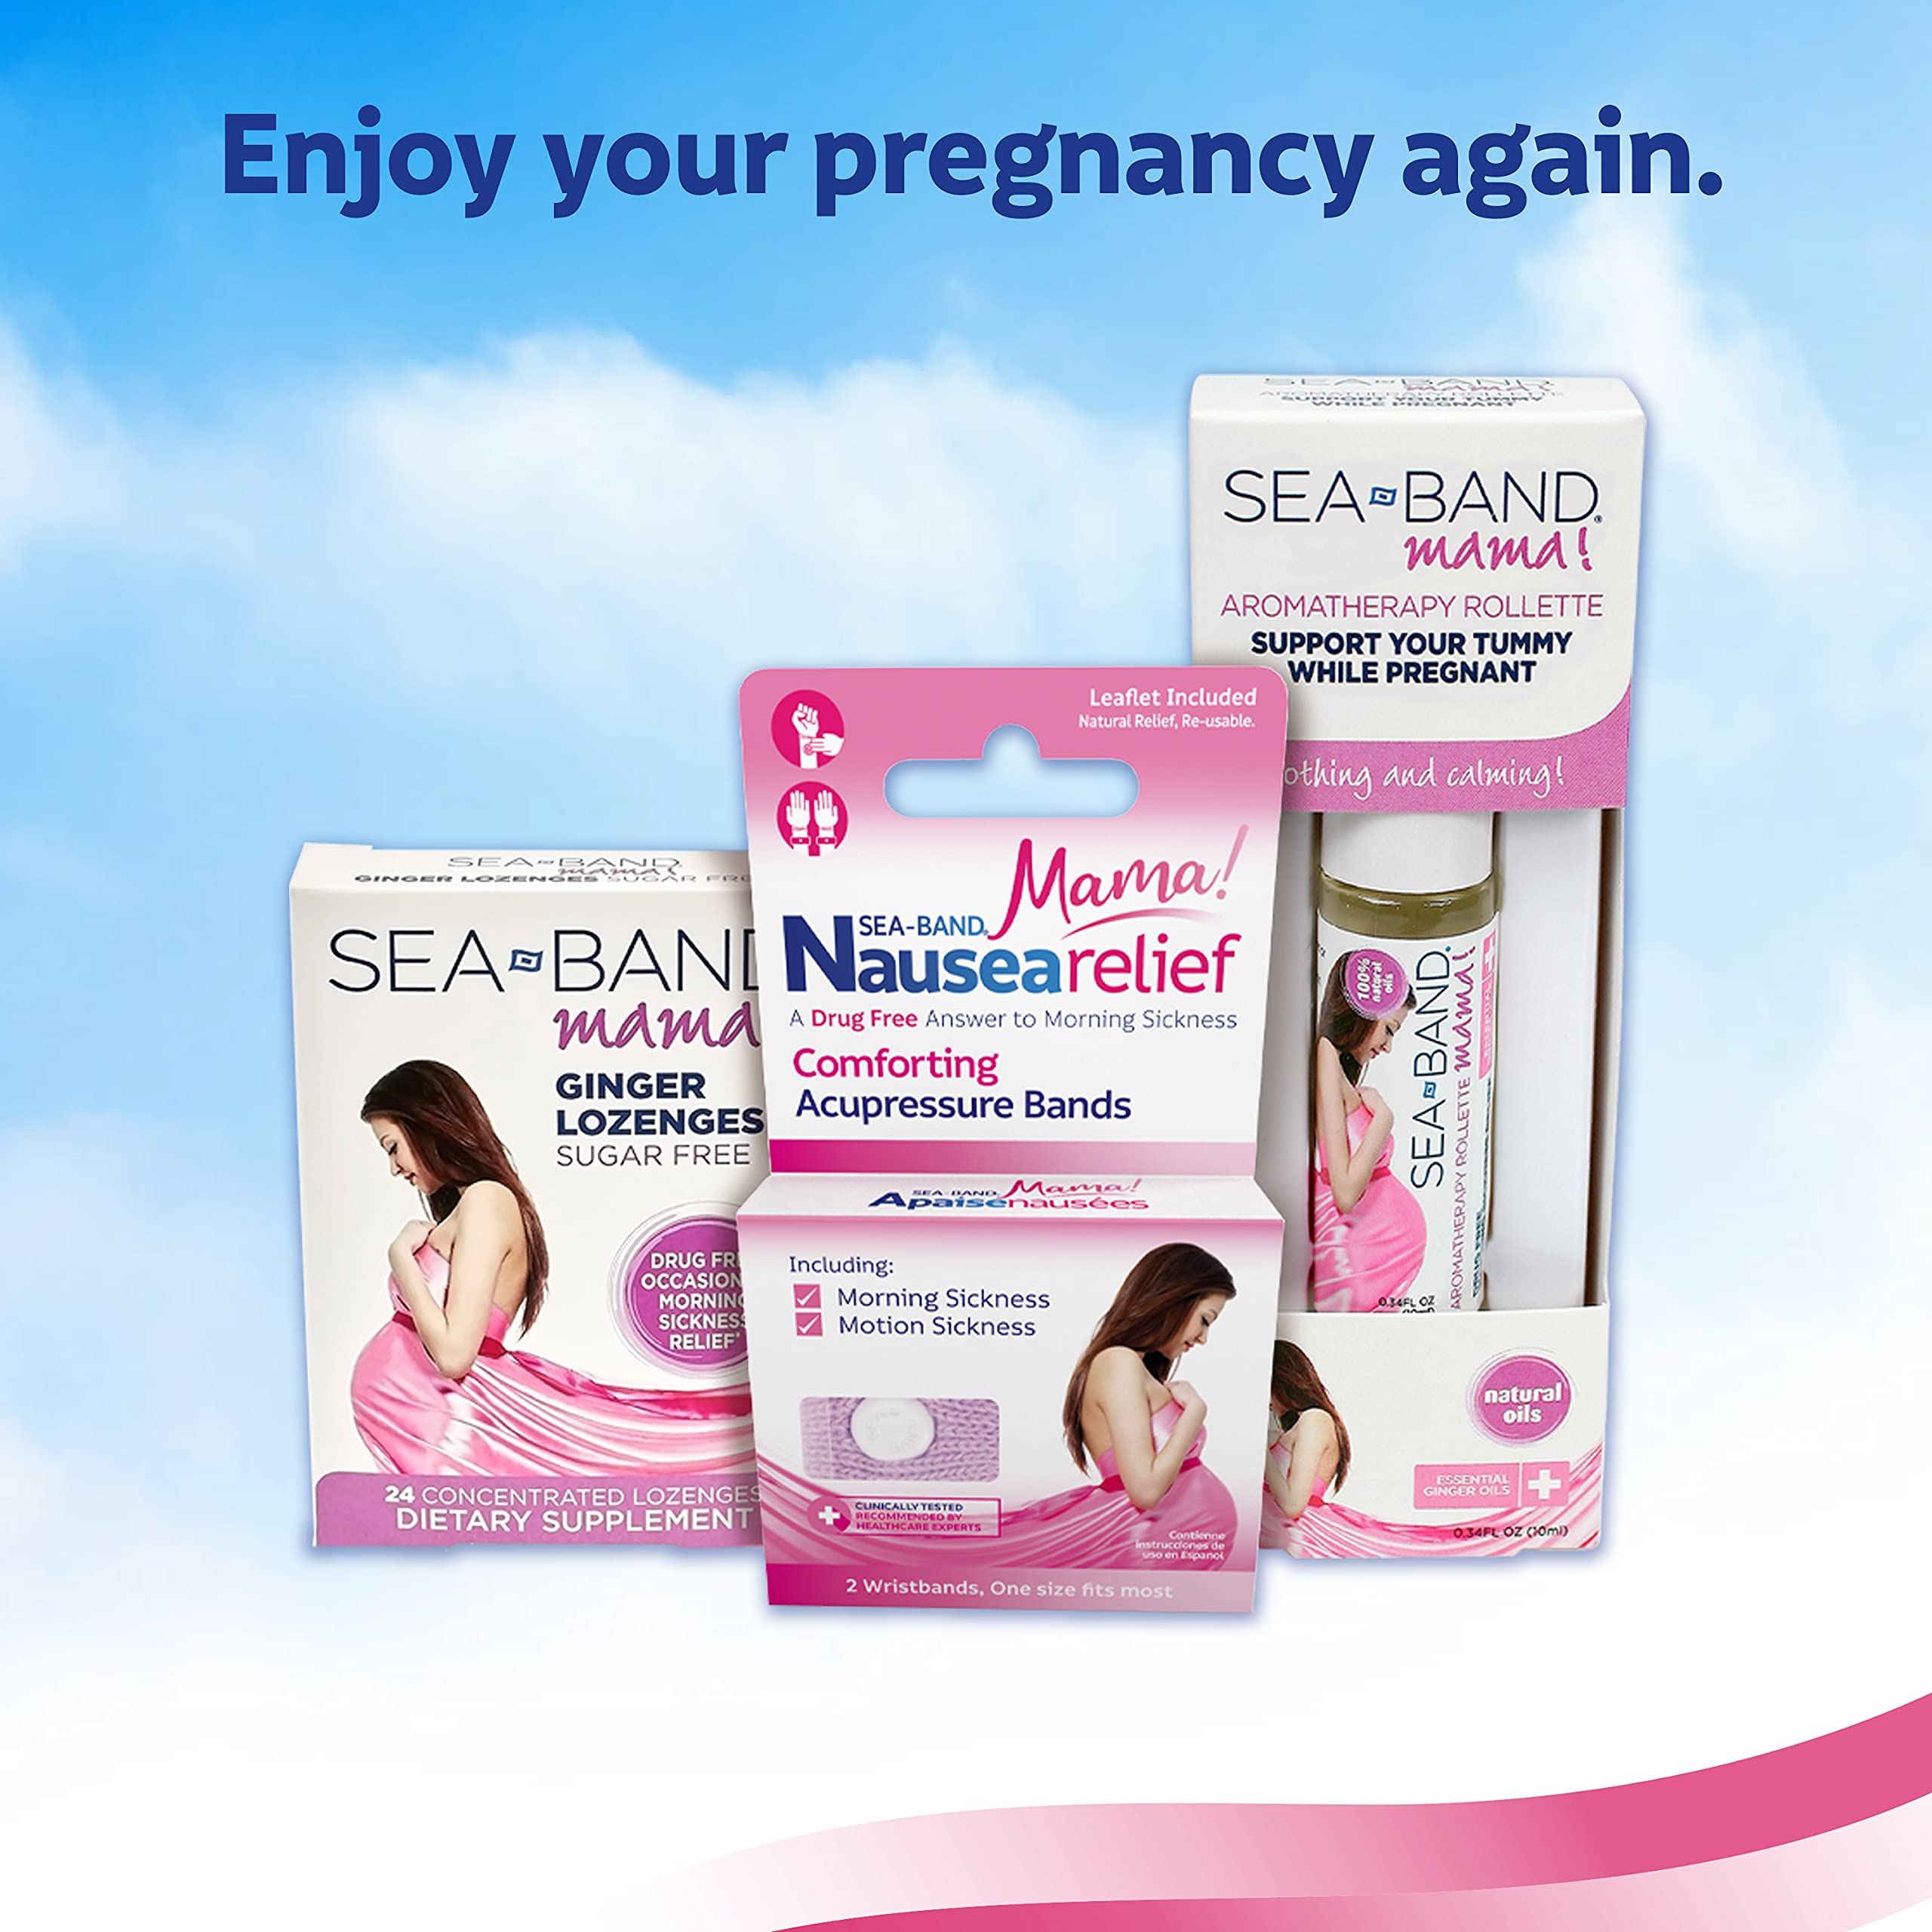 Sea-Band Mama! Anti-Nausea Aromatherapy Rollette with Essential Oils for Pregnancy Morning Sickness